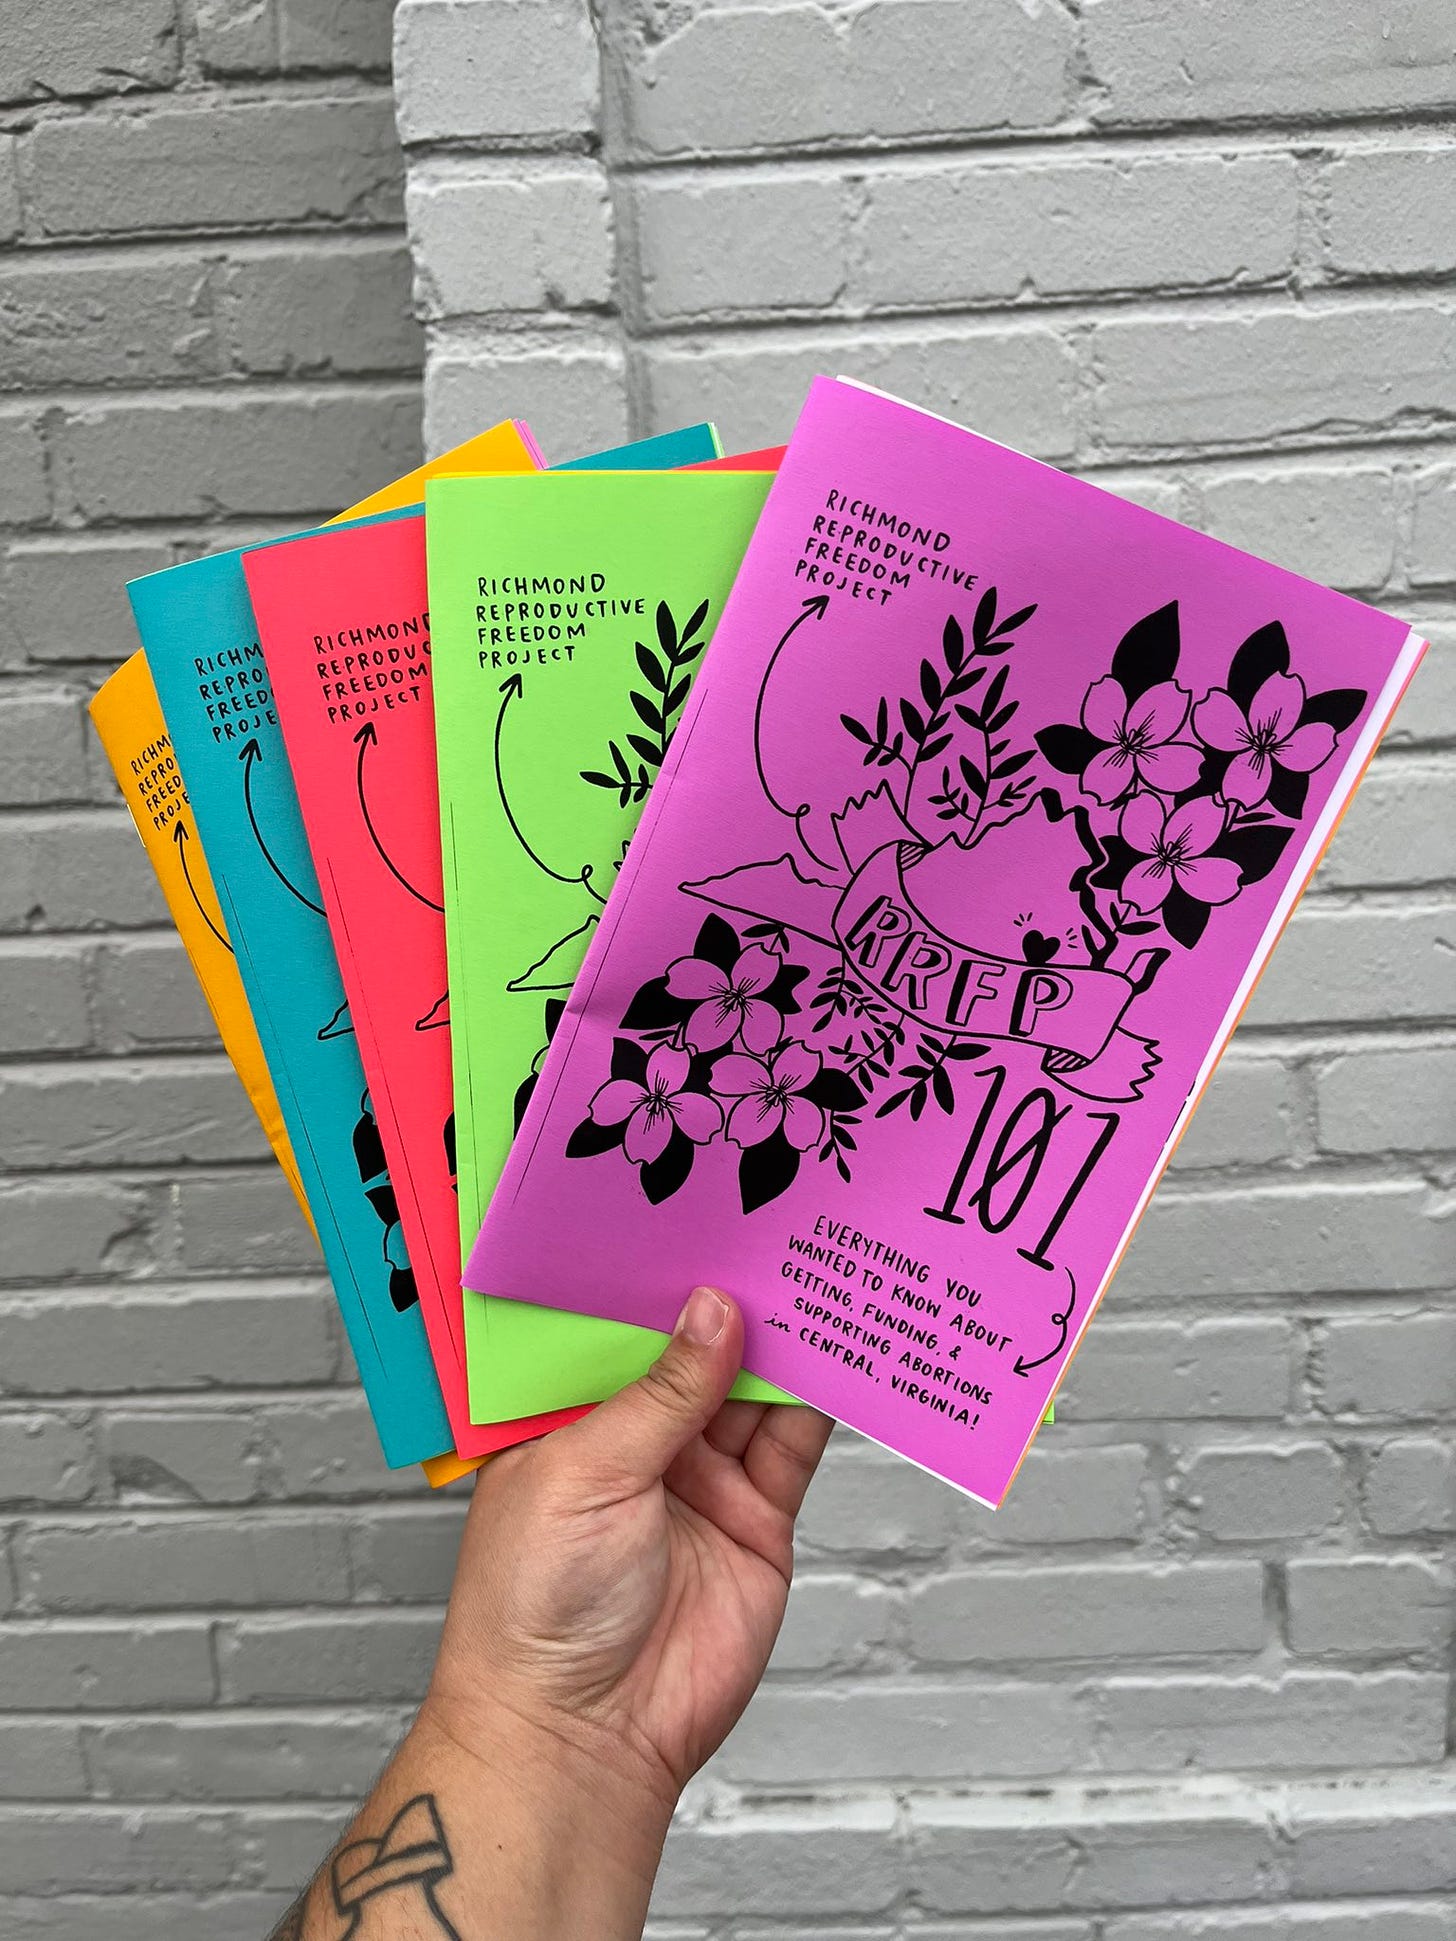 Photograph of a hand holding multiple copies of brightly colored "RRFP 101" zines